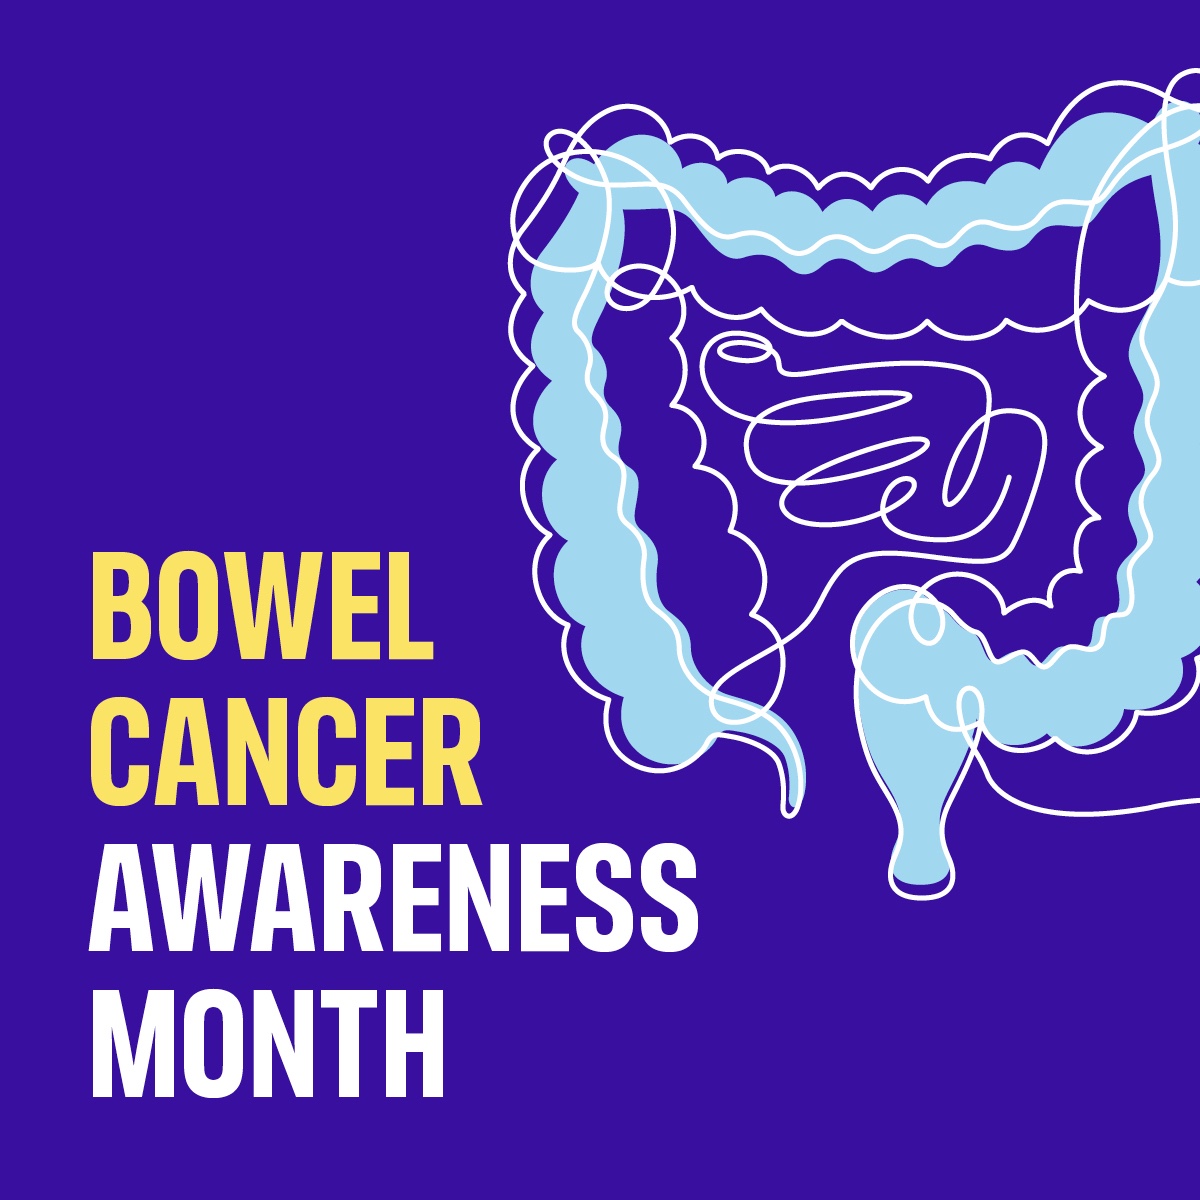 April is #BowelCancerAwarenessMonth. Find out more about #BowelCancer, including how common it is and ways to reduce your risk: wcrf-uk.org/cancer-types/b…